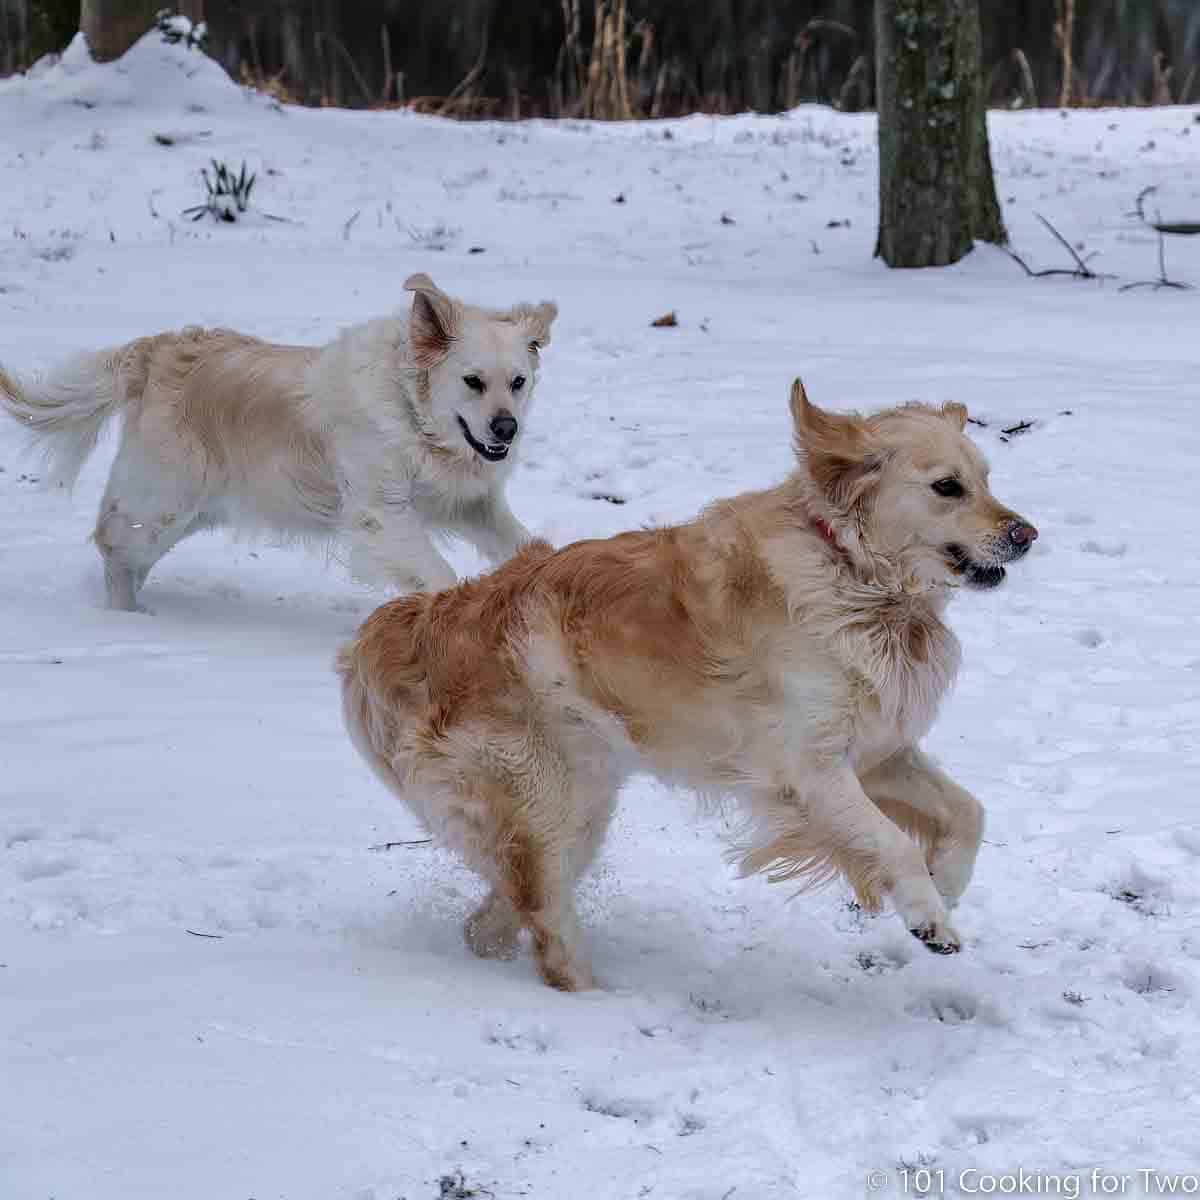 Molly and Lilly playing in a snowy yard.